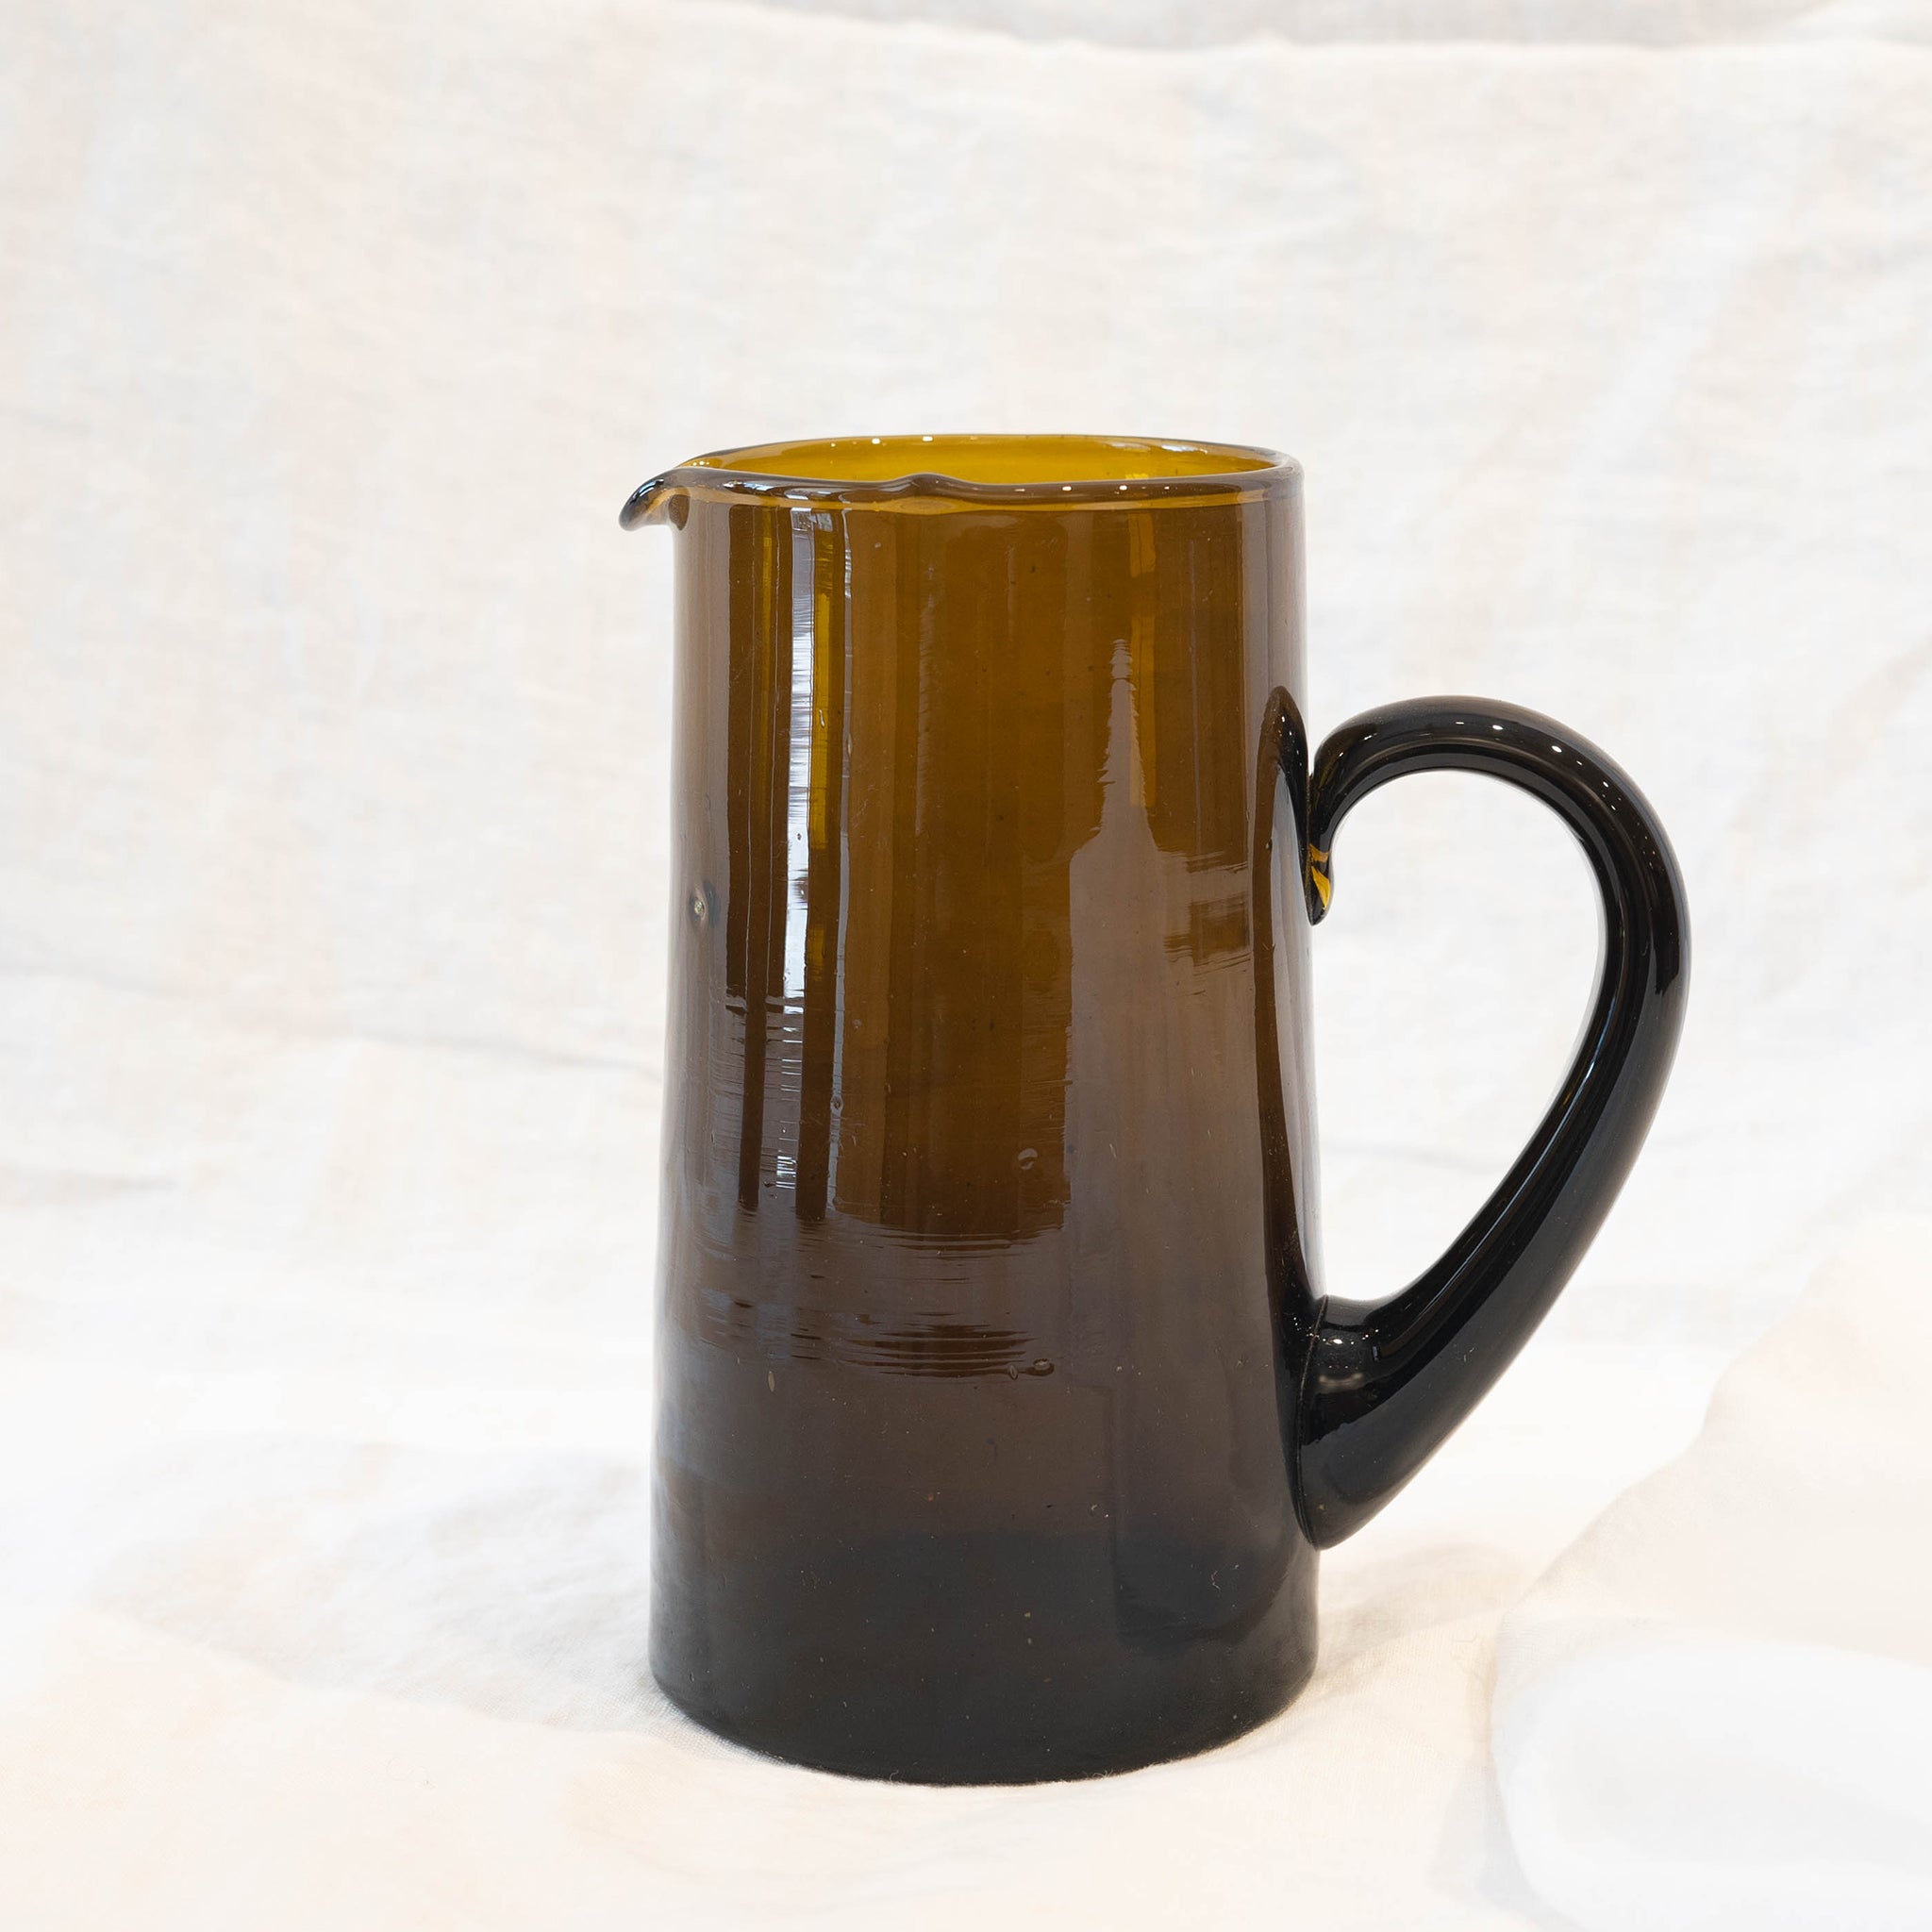 bronze tall recycled glass jug with spout and handle